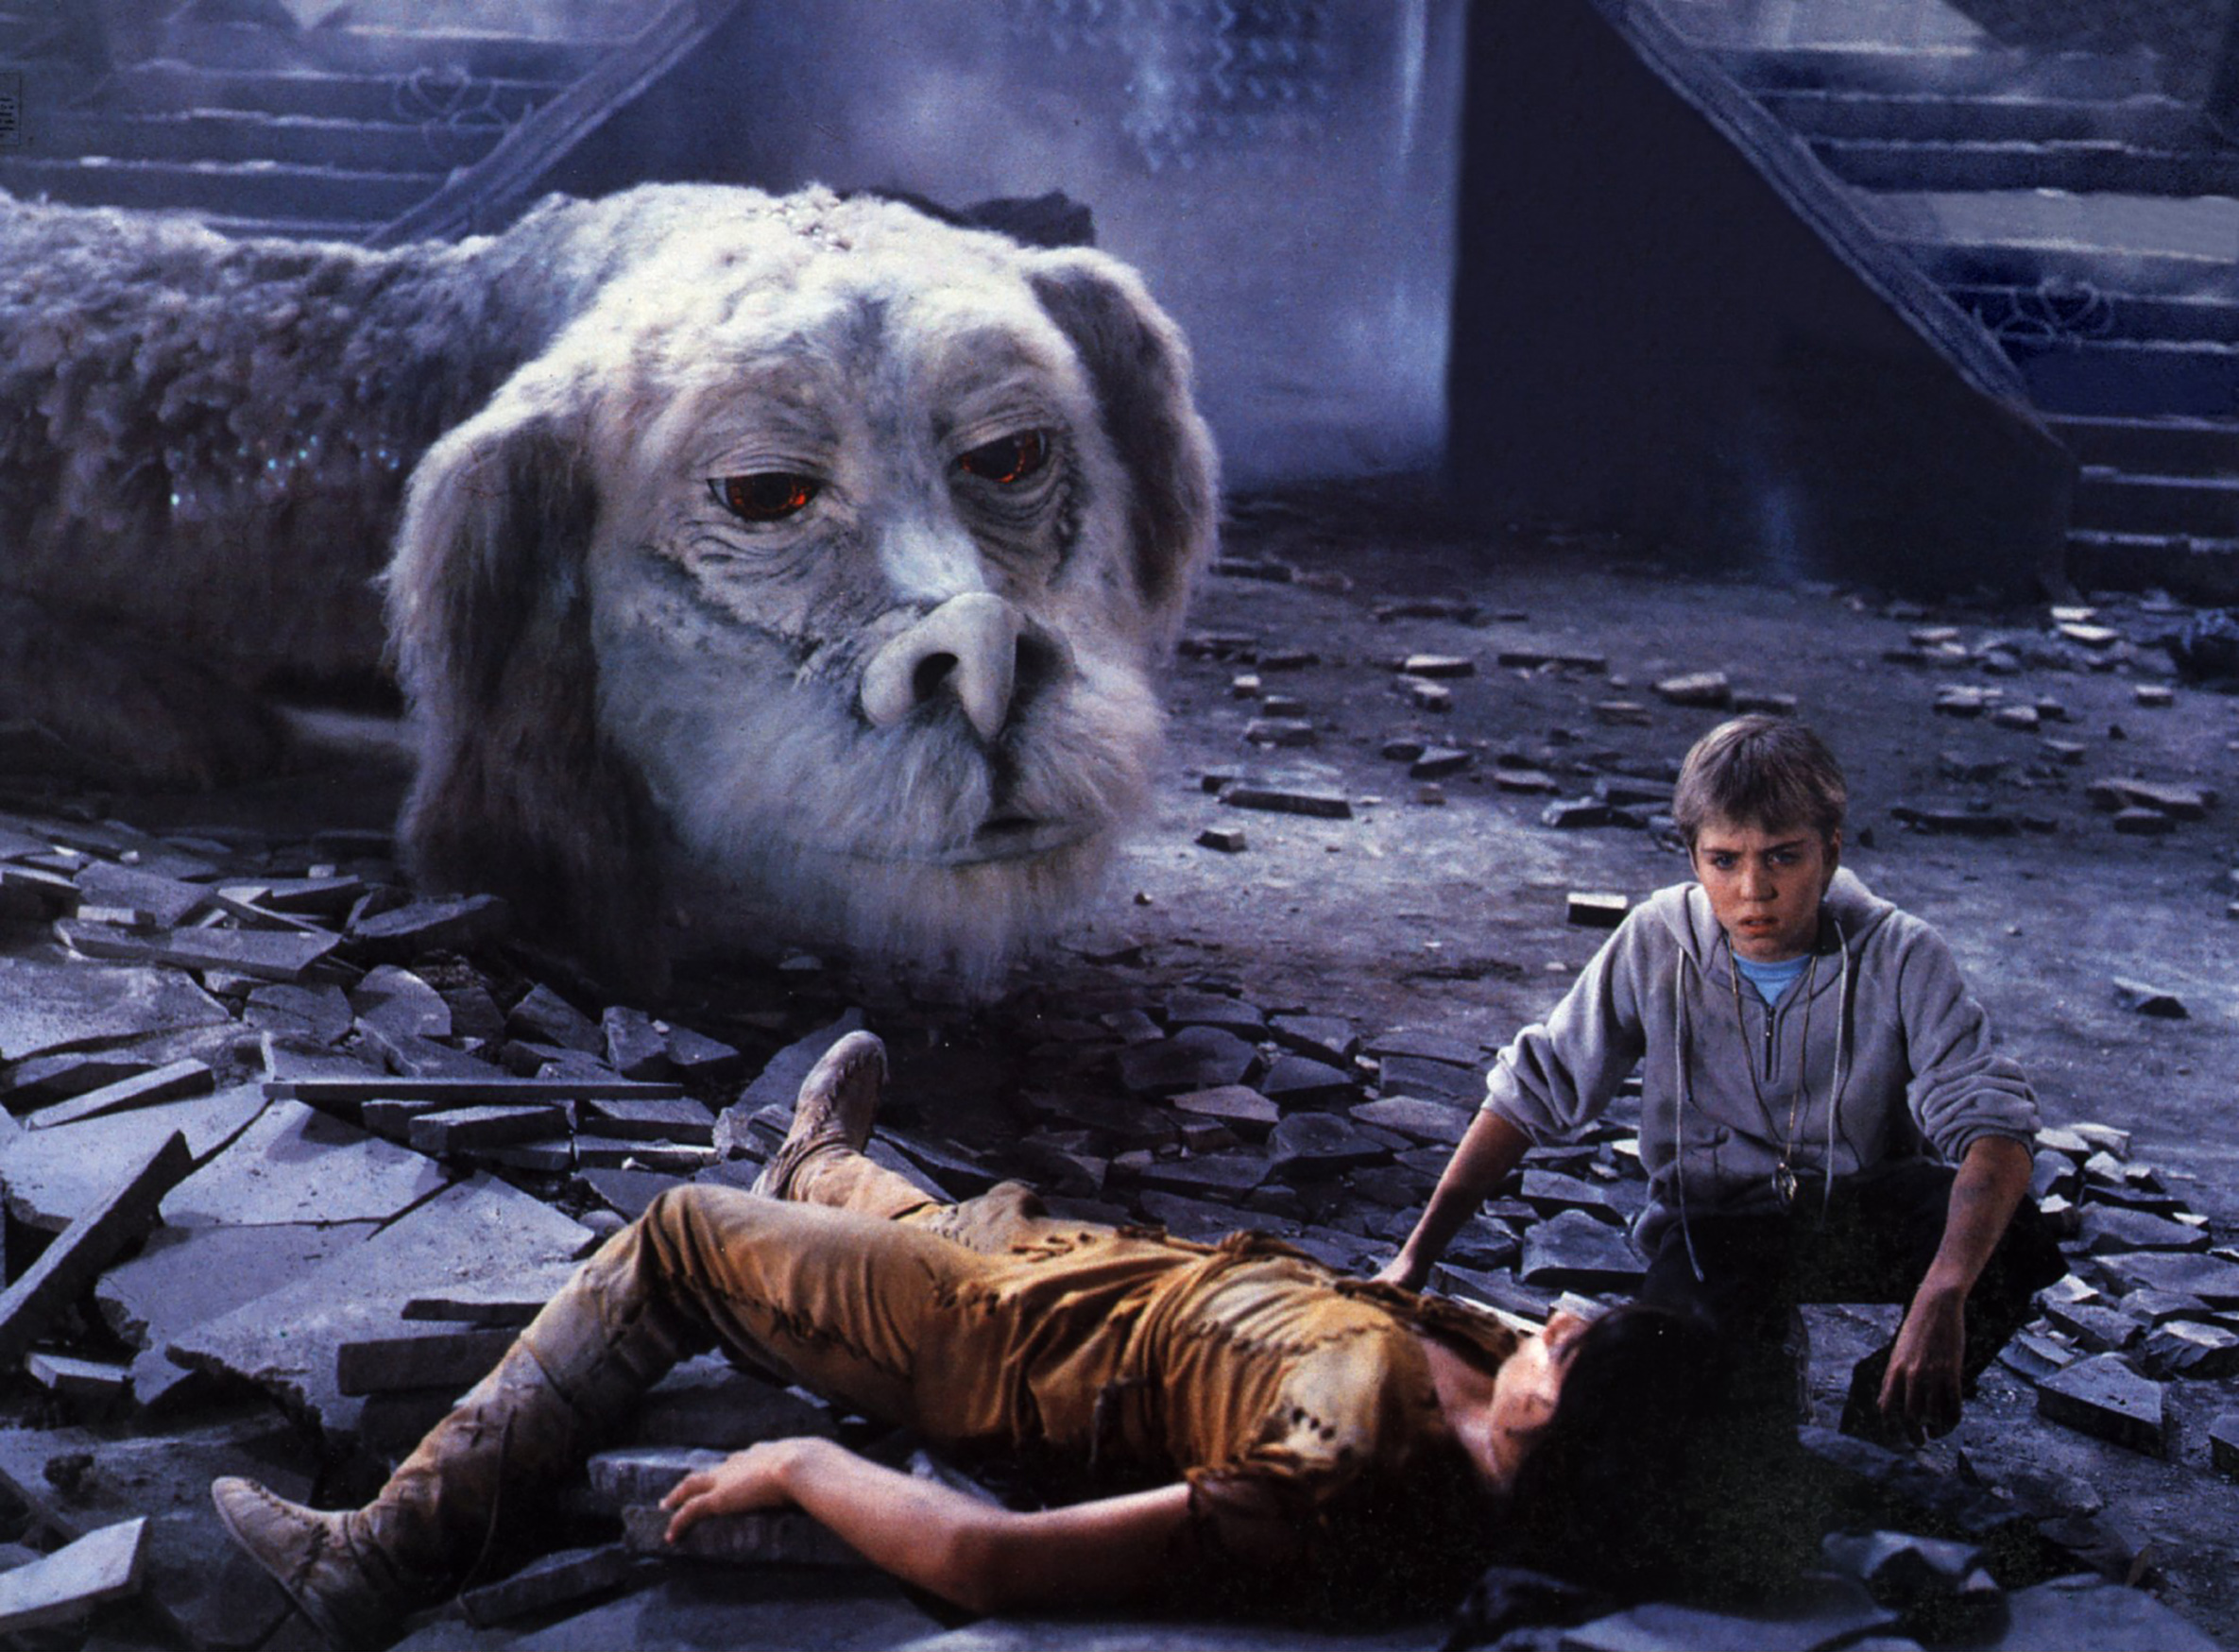 Jonathan Brandis as Bastian Bux in "The NeverEnding Story II: The Next Chapter" in 1990 | Source: Getty Images